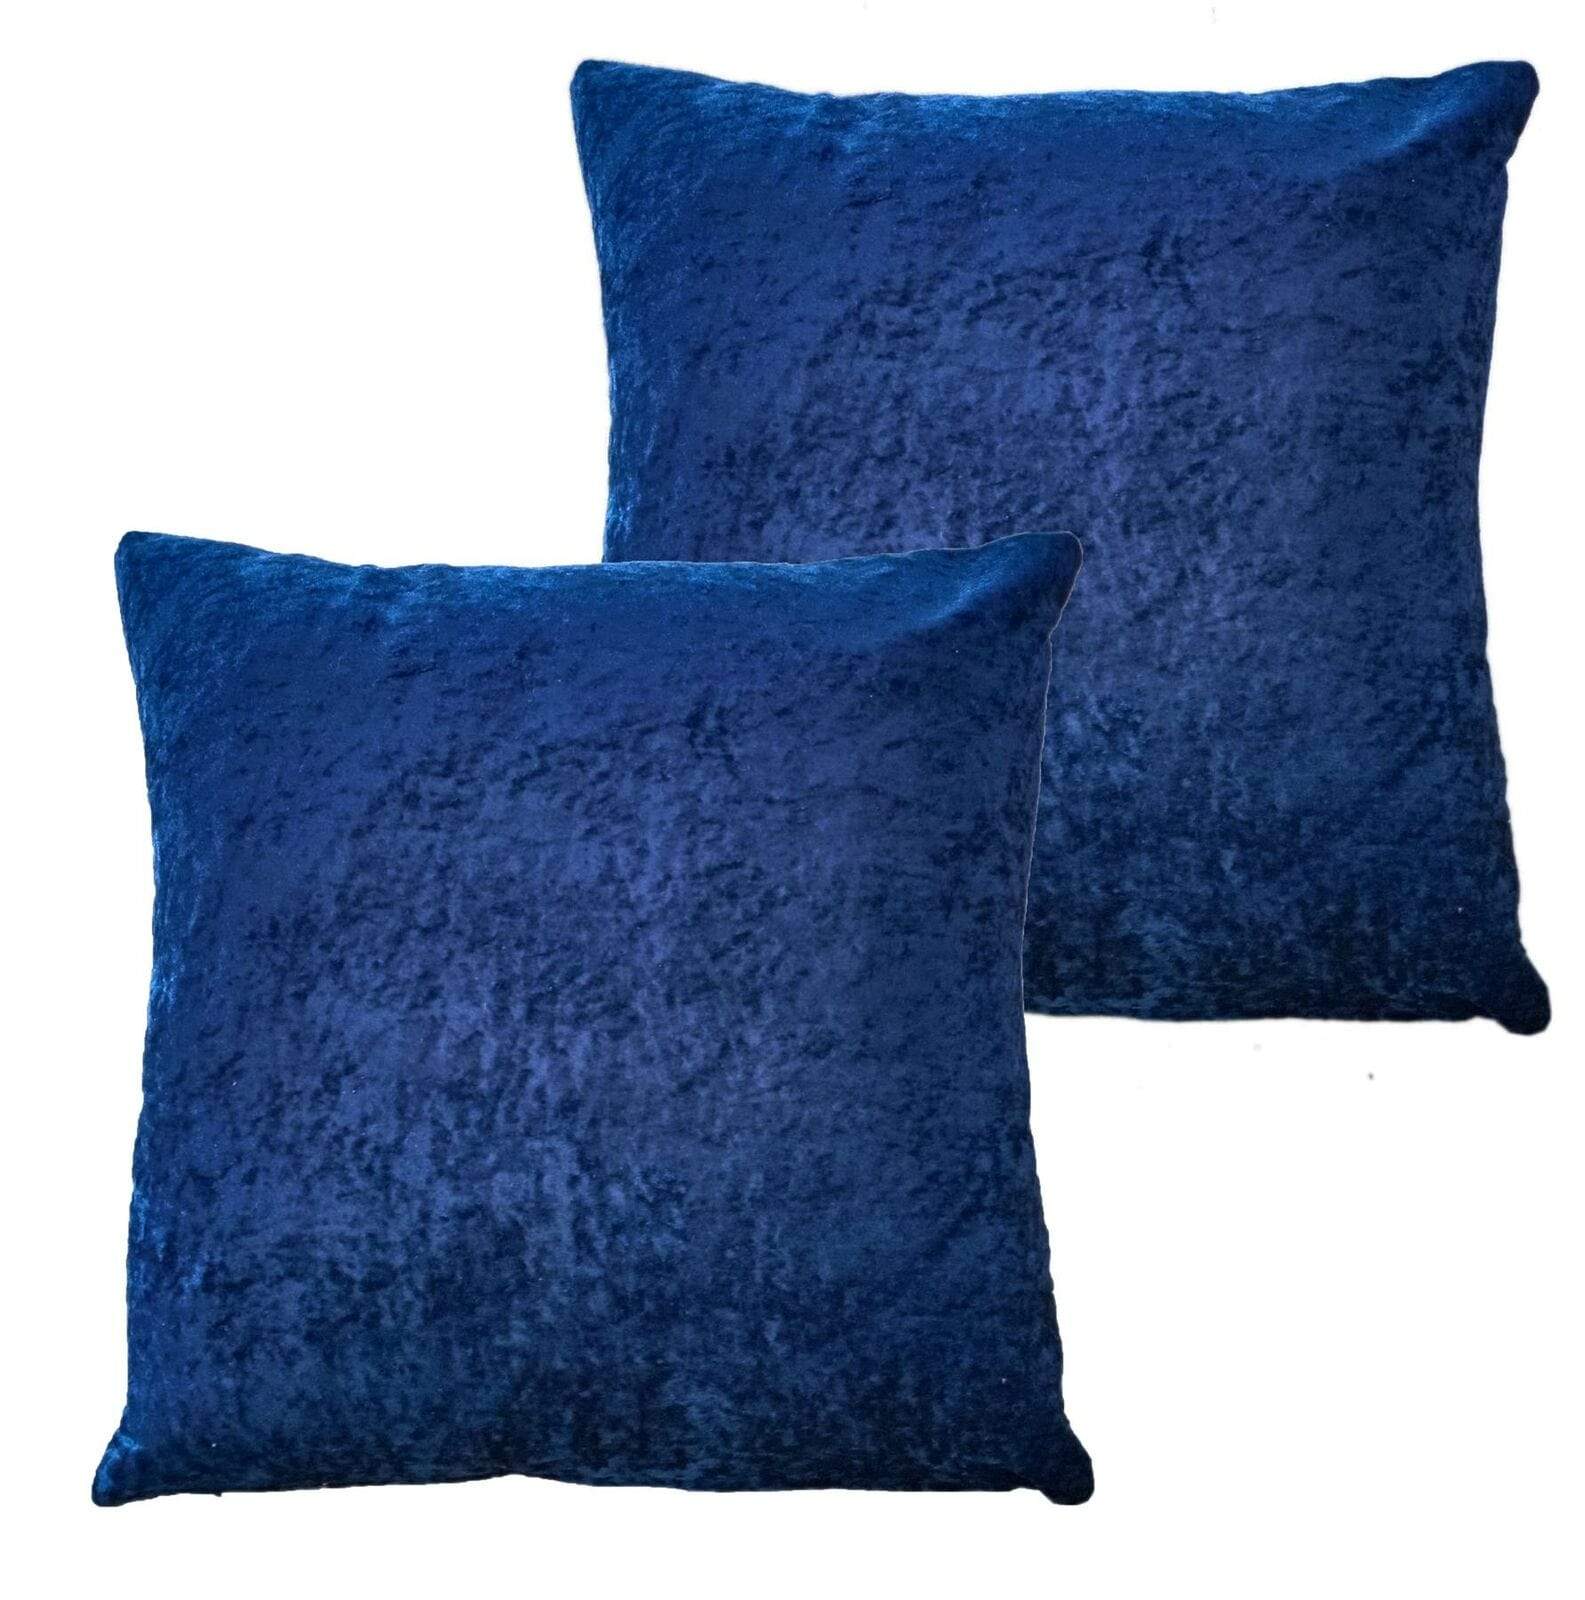 Crushed Velvet Cushion Covers NAVY OLIVIA ROCCO Cushions